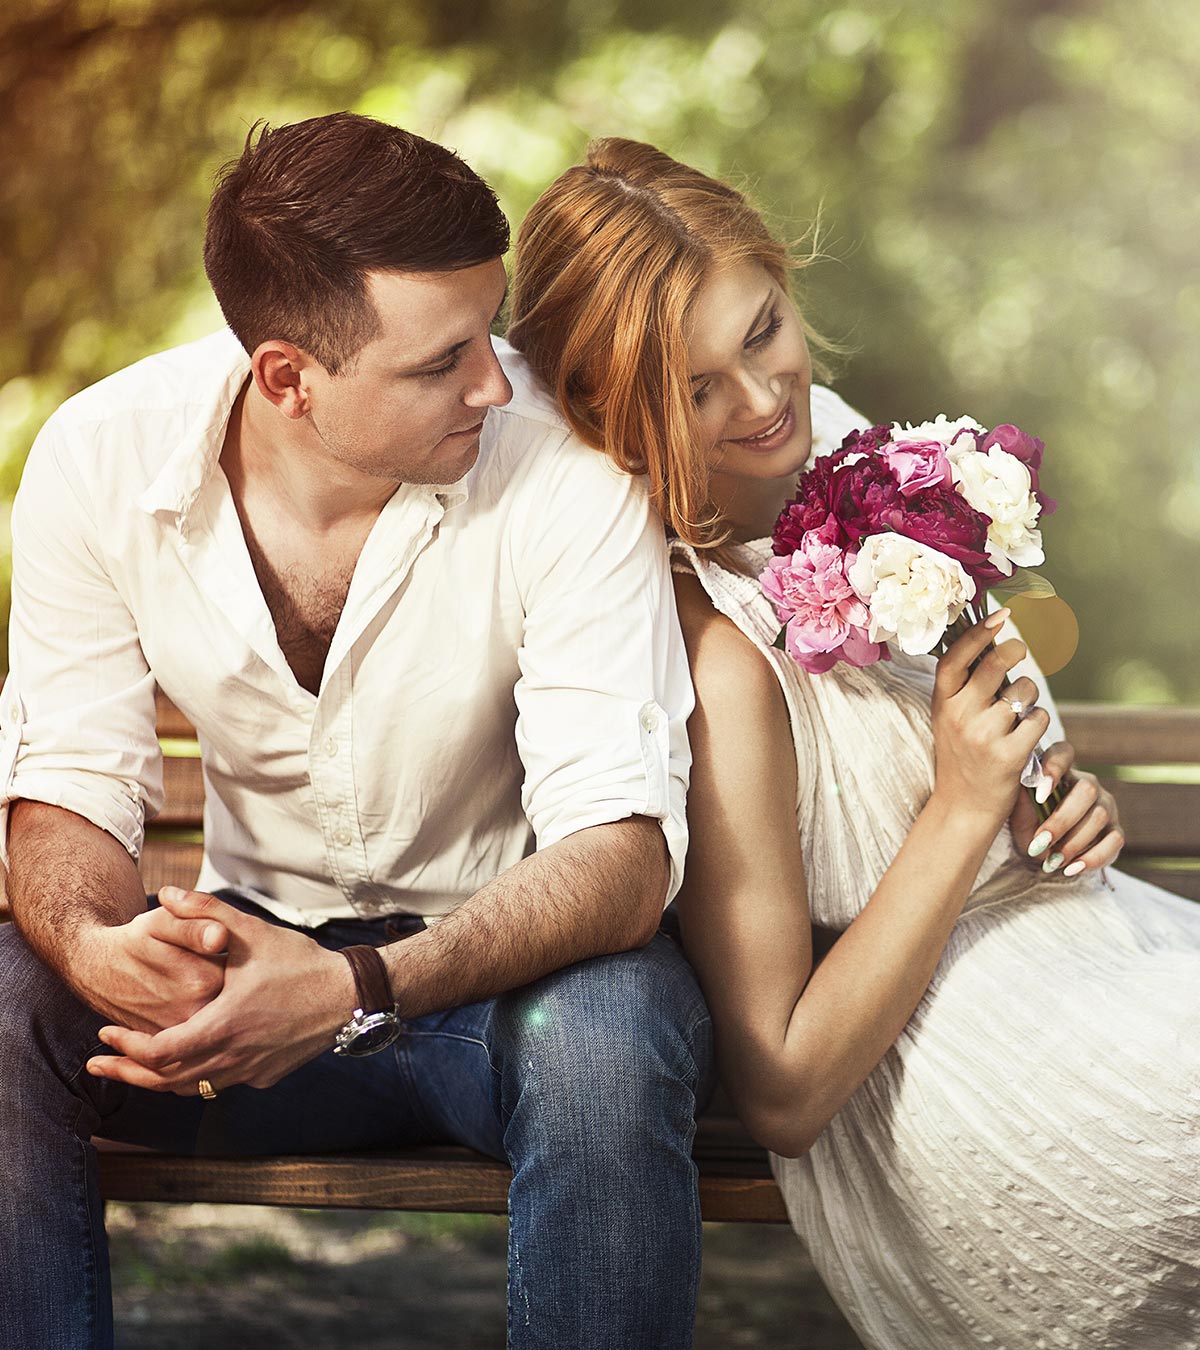 Interesting Facts About Love That Might Surprise You